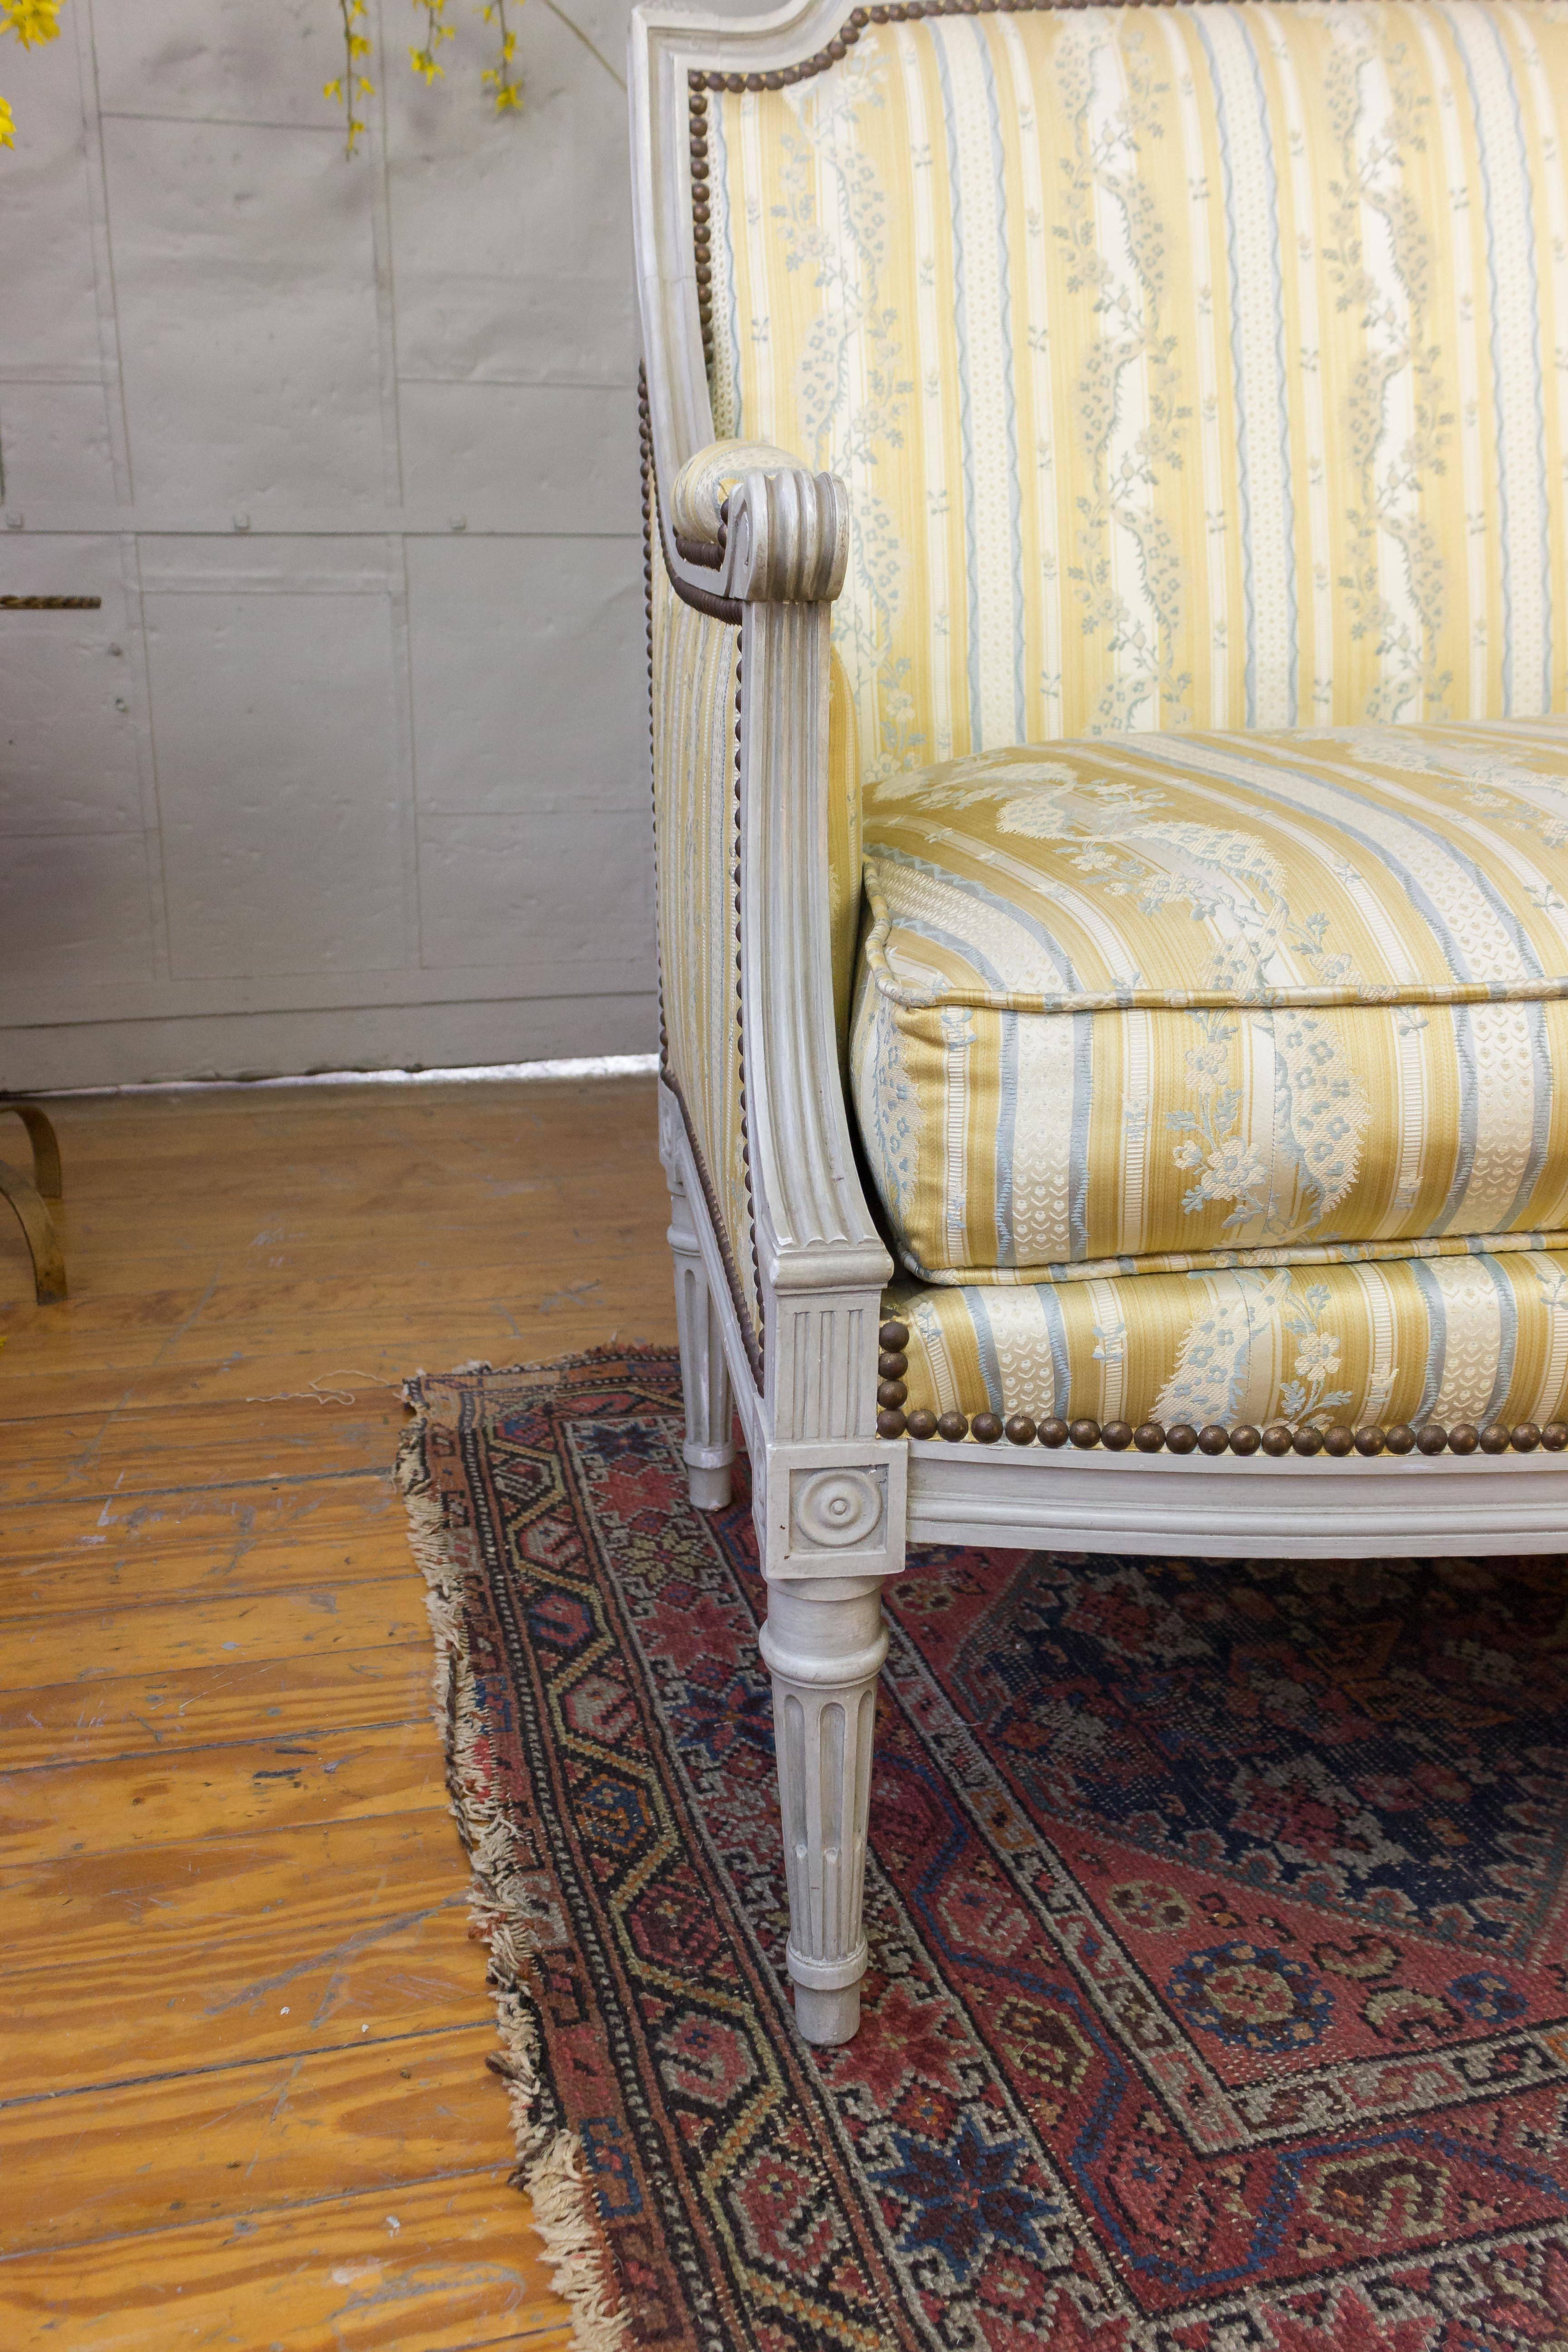 Early 20th Century French Louis XVI Style Sofa with Painted Carved Frame